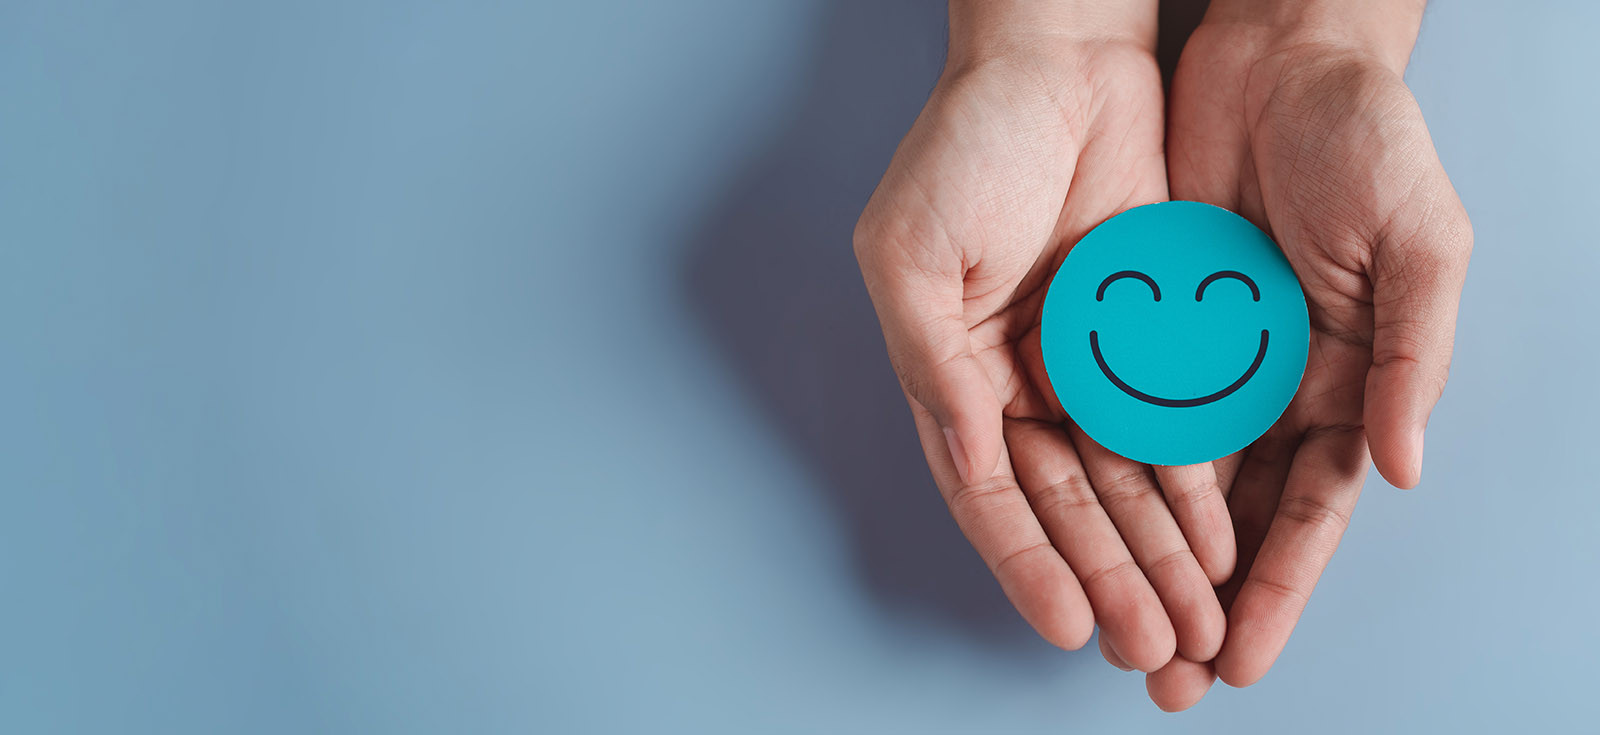 Hands holding blue happy smile face, good feedback rating, positive customer review, experience, satisfaction survey, smiley mental health, child wellness, world mental health day on blue background